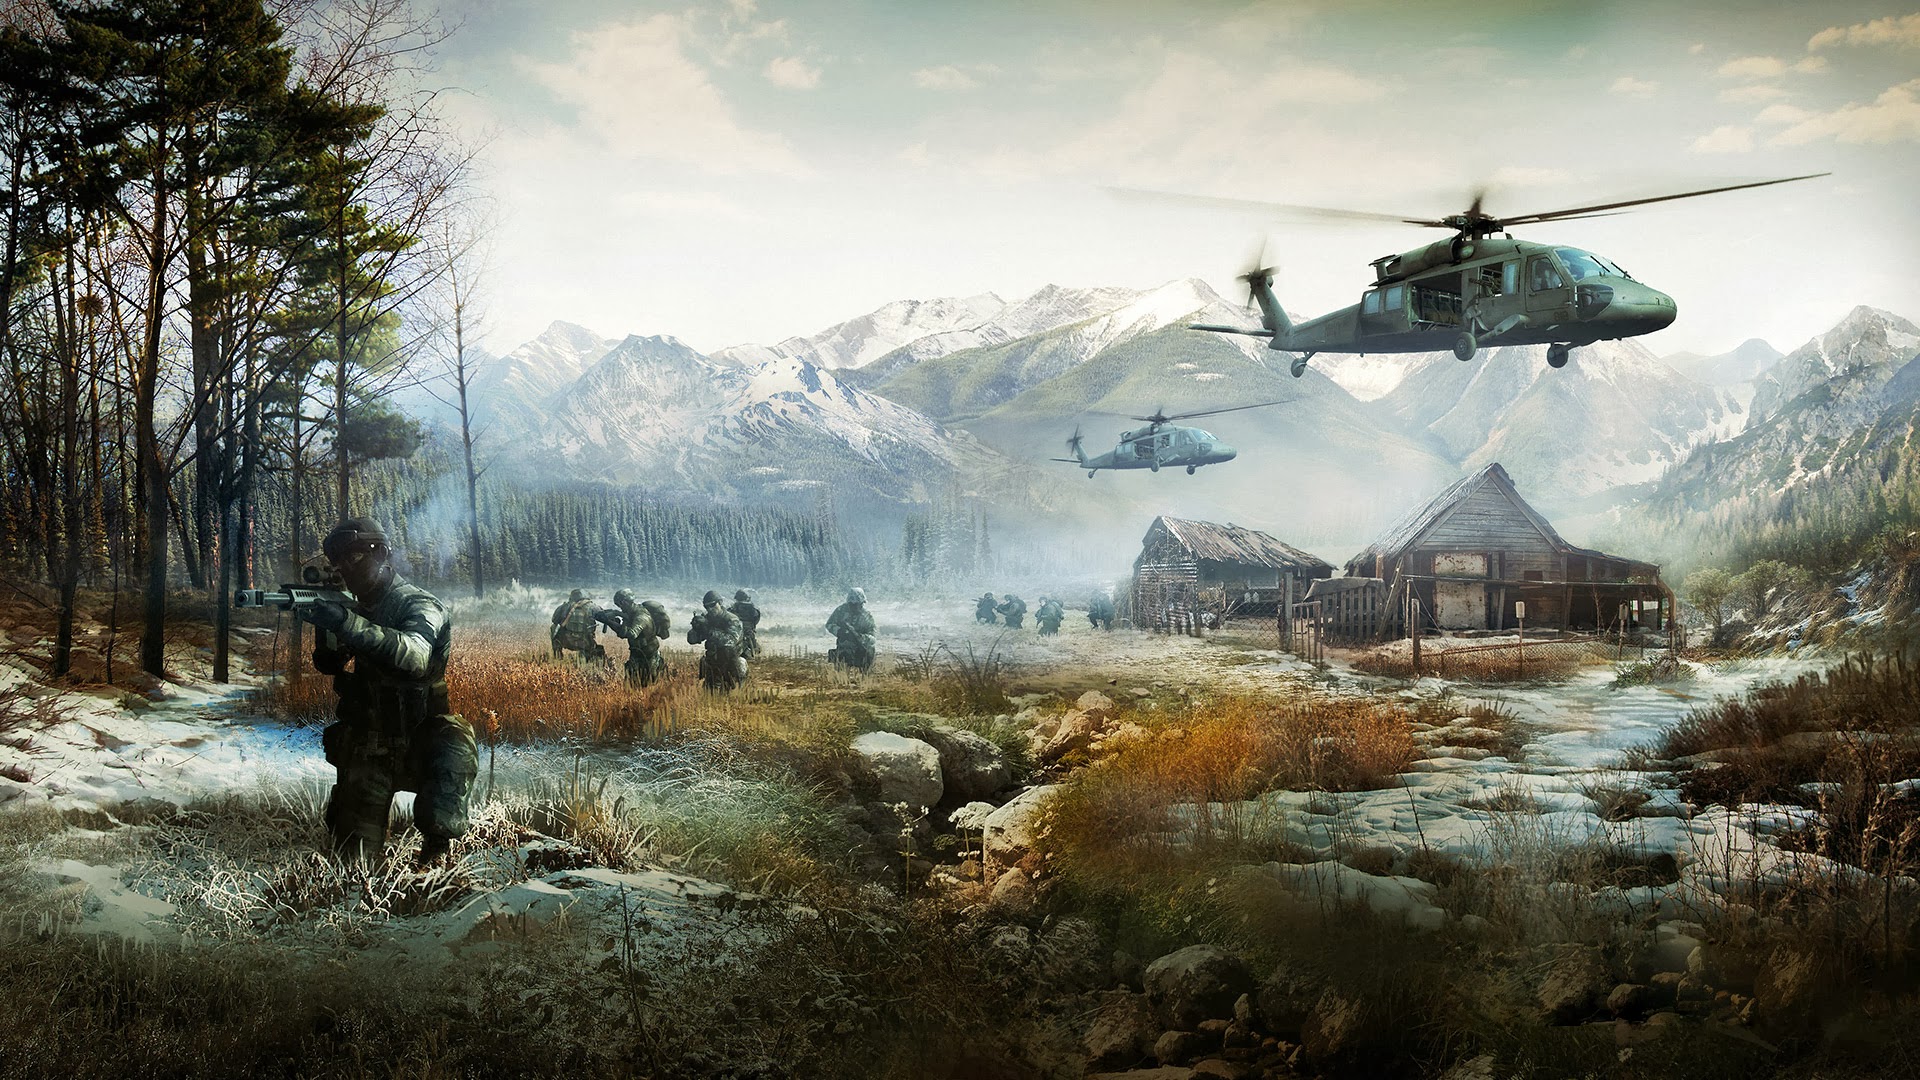 Free download battlefield 4 game HD wallpaper helicopter soldier scenery mountains [1920x1080] for your Desktop, Mobile & Tablet. Explore Battlefield Wallpaper 1920x1080. BF4 Wallpaper 1080p, Battlefield 3 Wallpaper, Battlefield Wallpaper 1080p